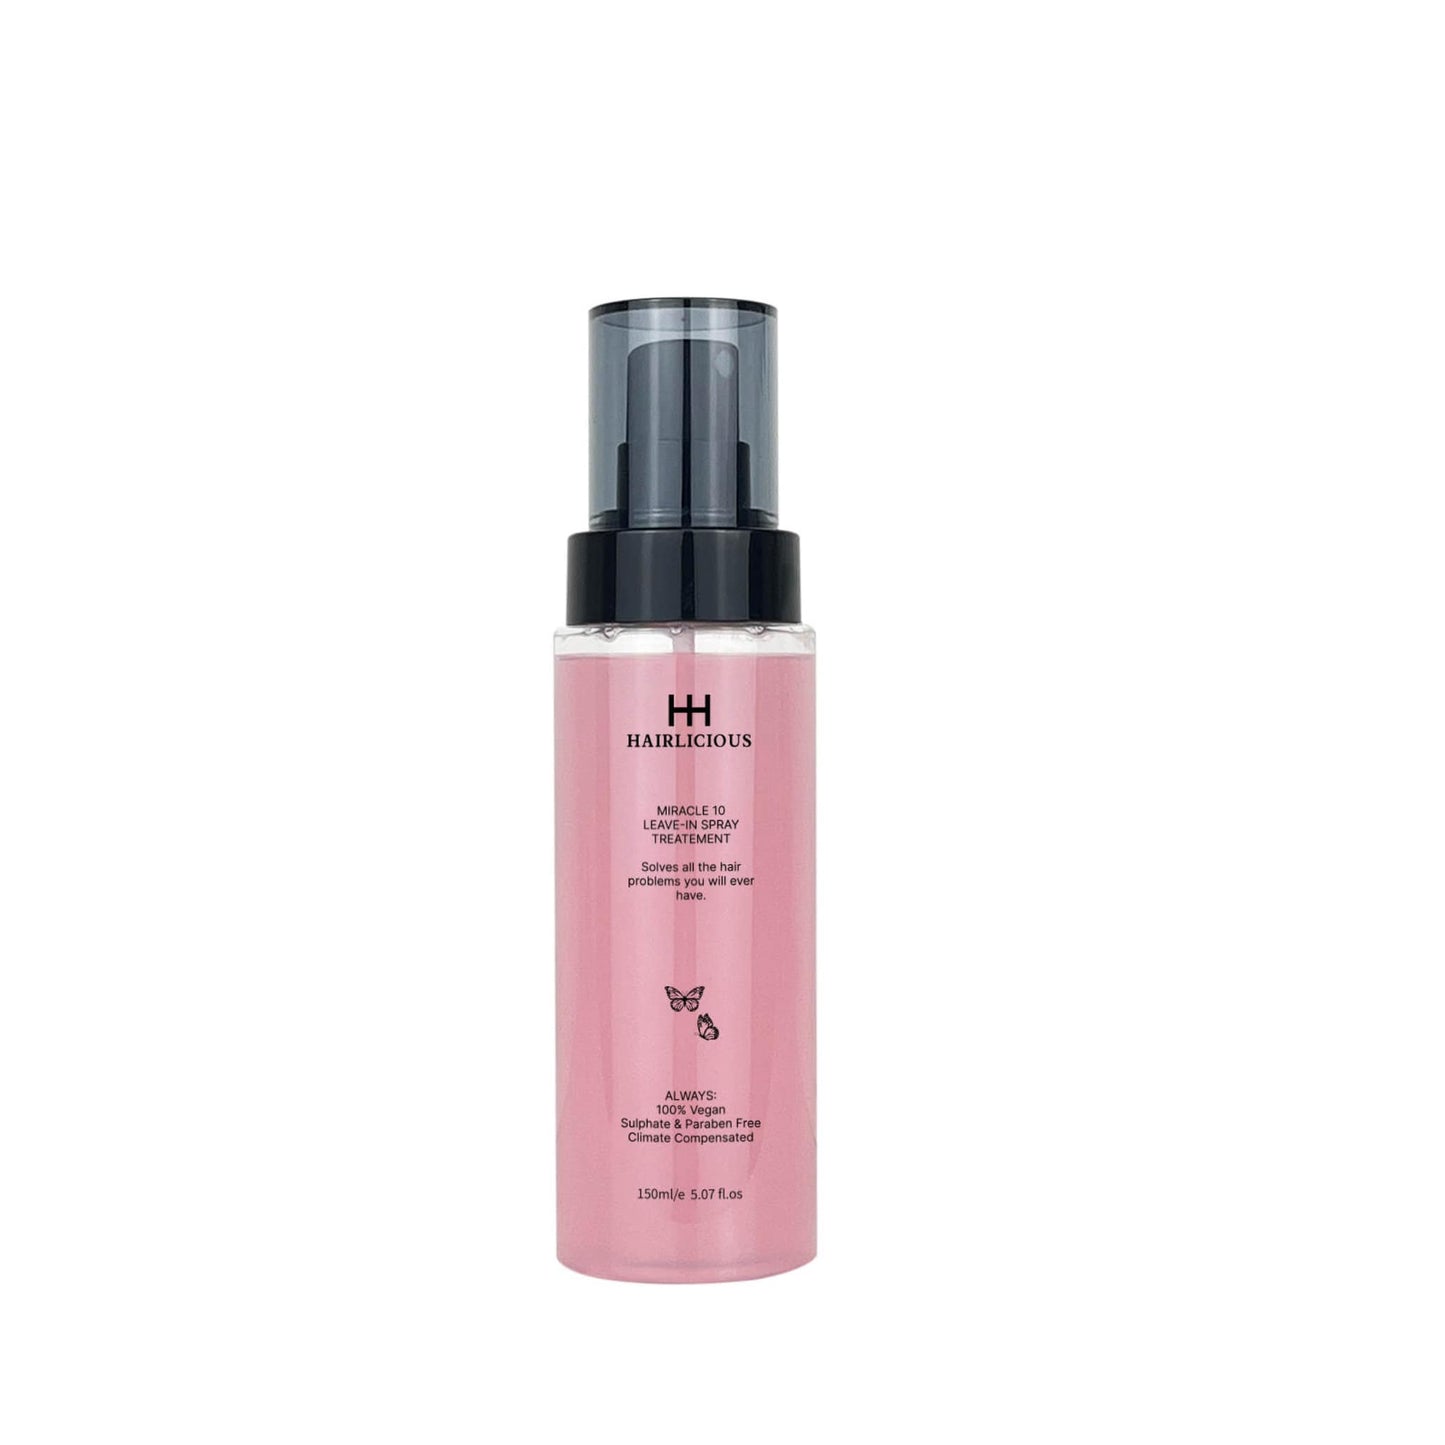 Hairlicious Leave-in spray